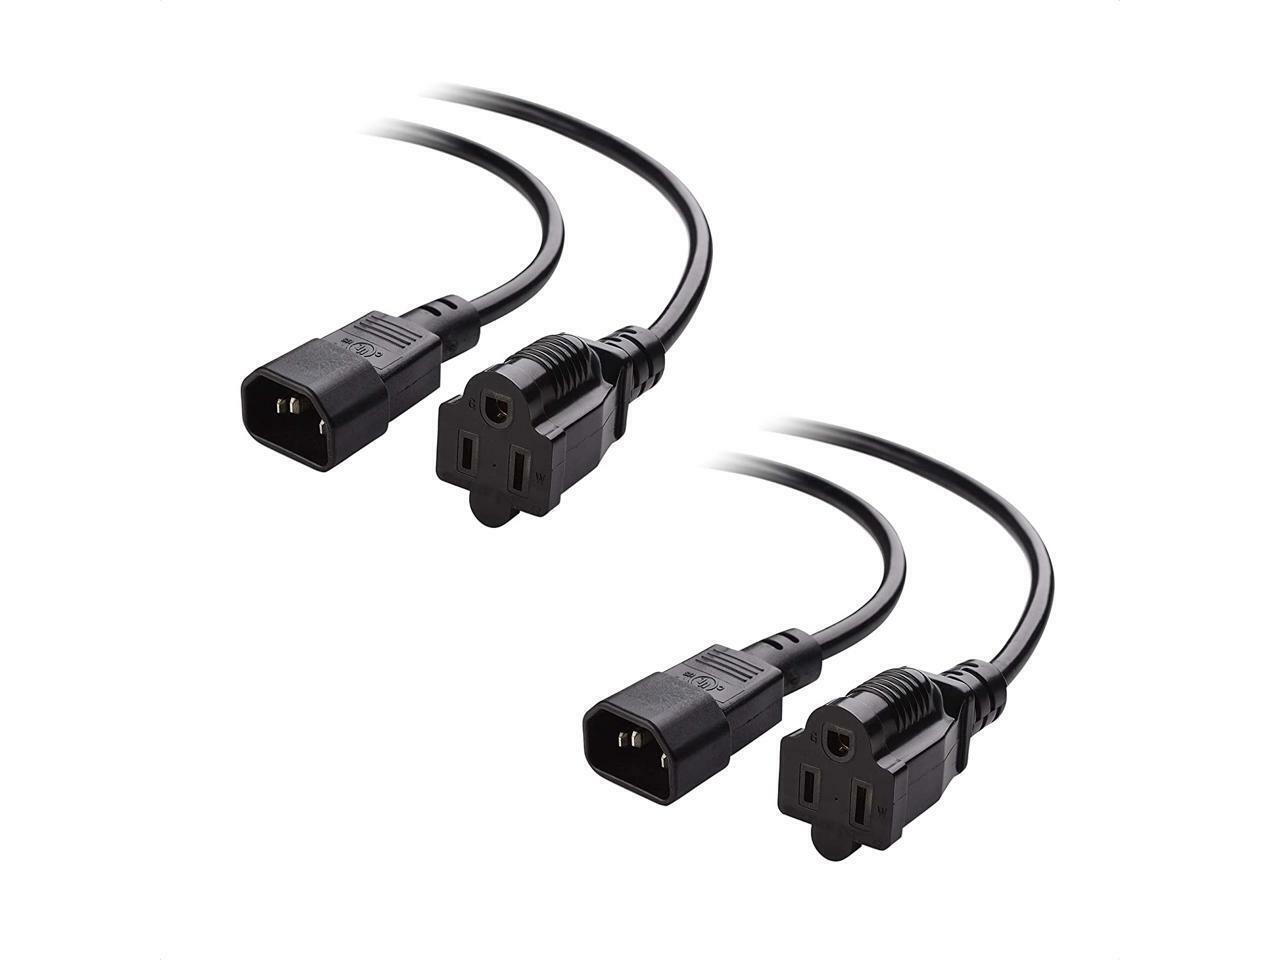 Cable Matters 2-Pack Computer Equipment to PDU Power Cord, Power Cable 1 Foot 